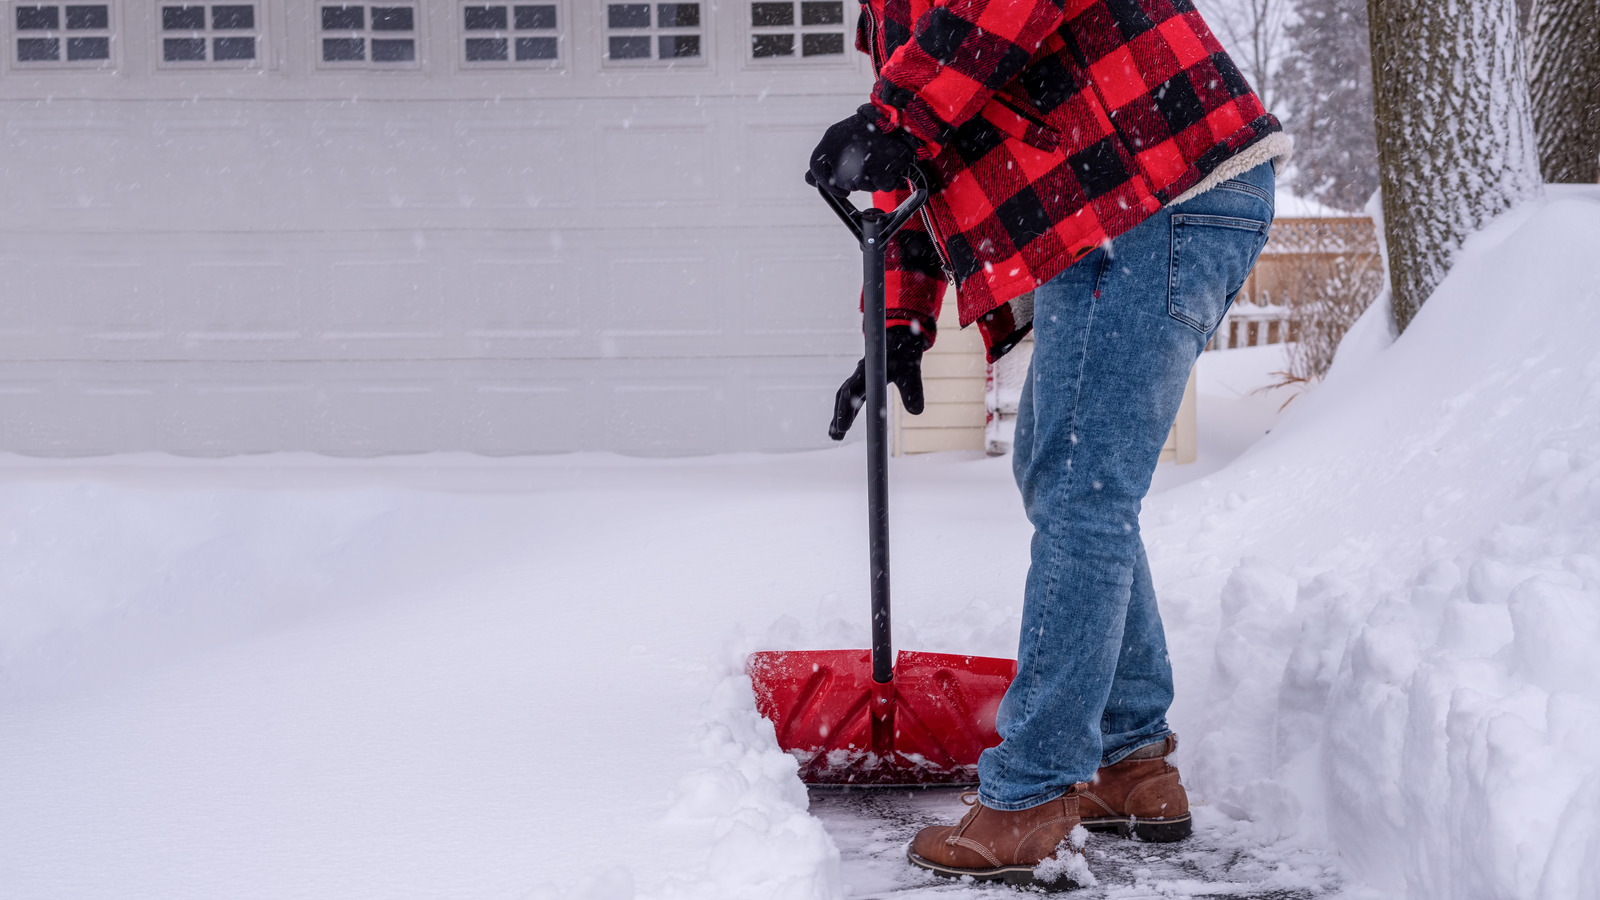 Try using a salt alternative at your home this winter and help